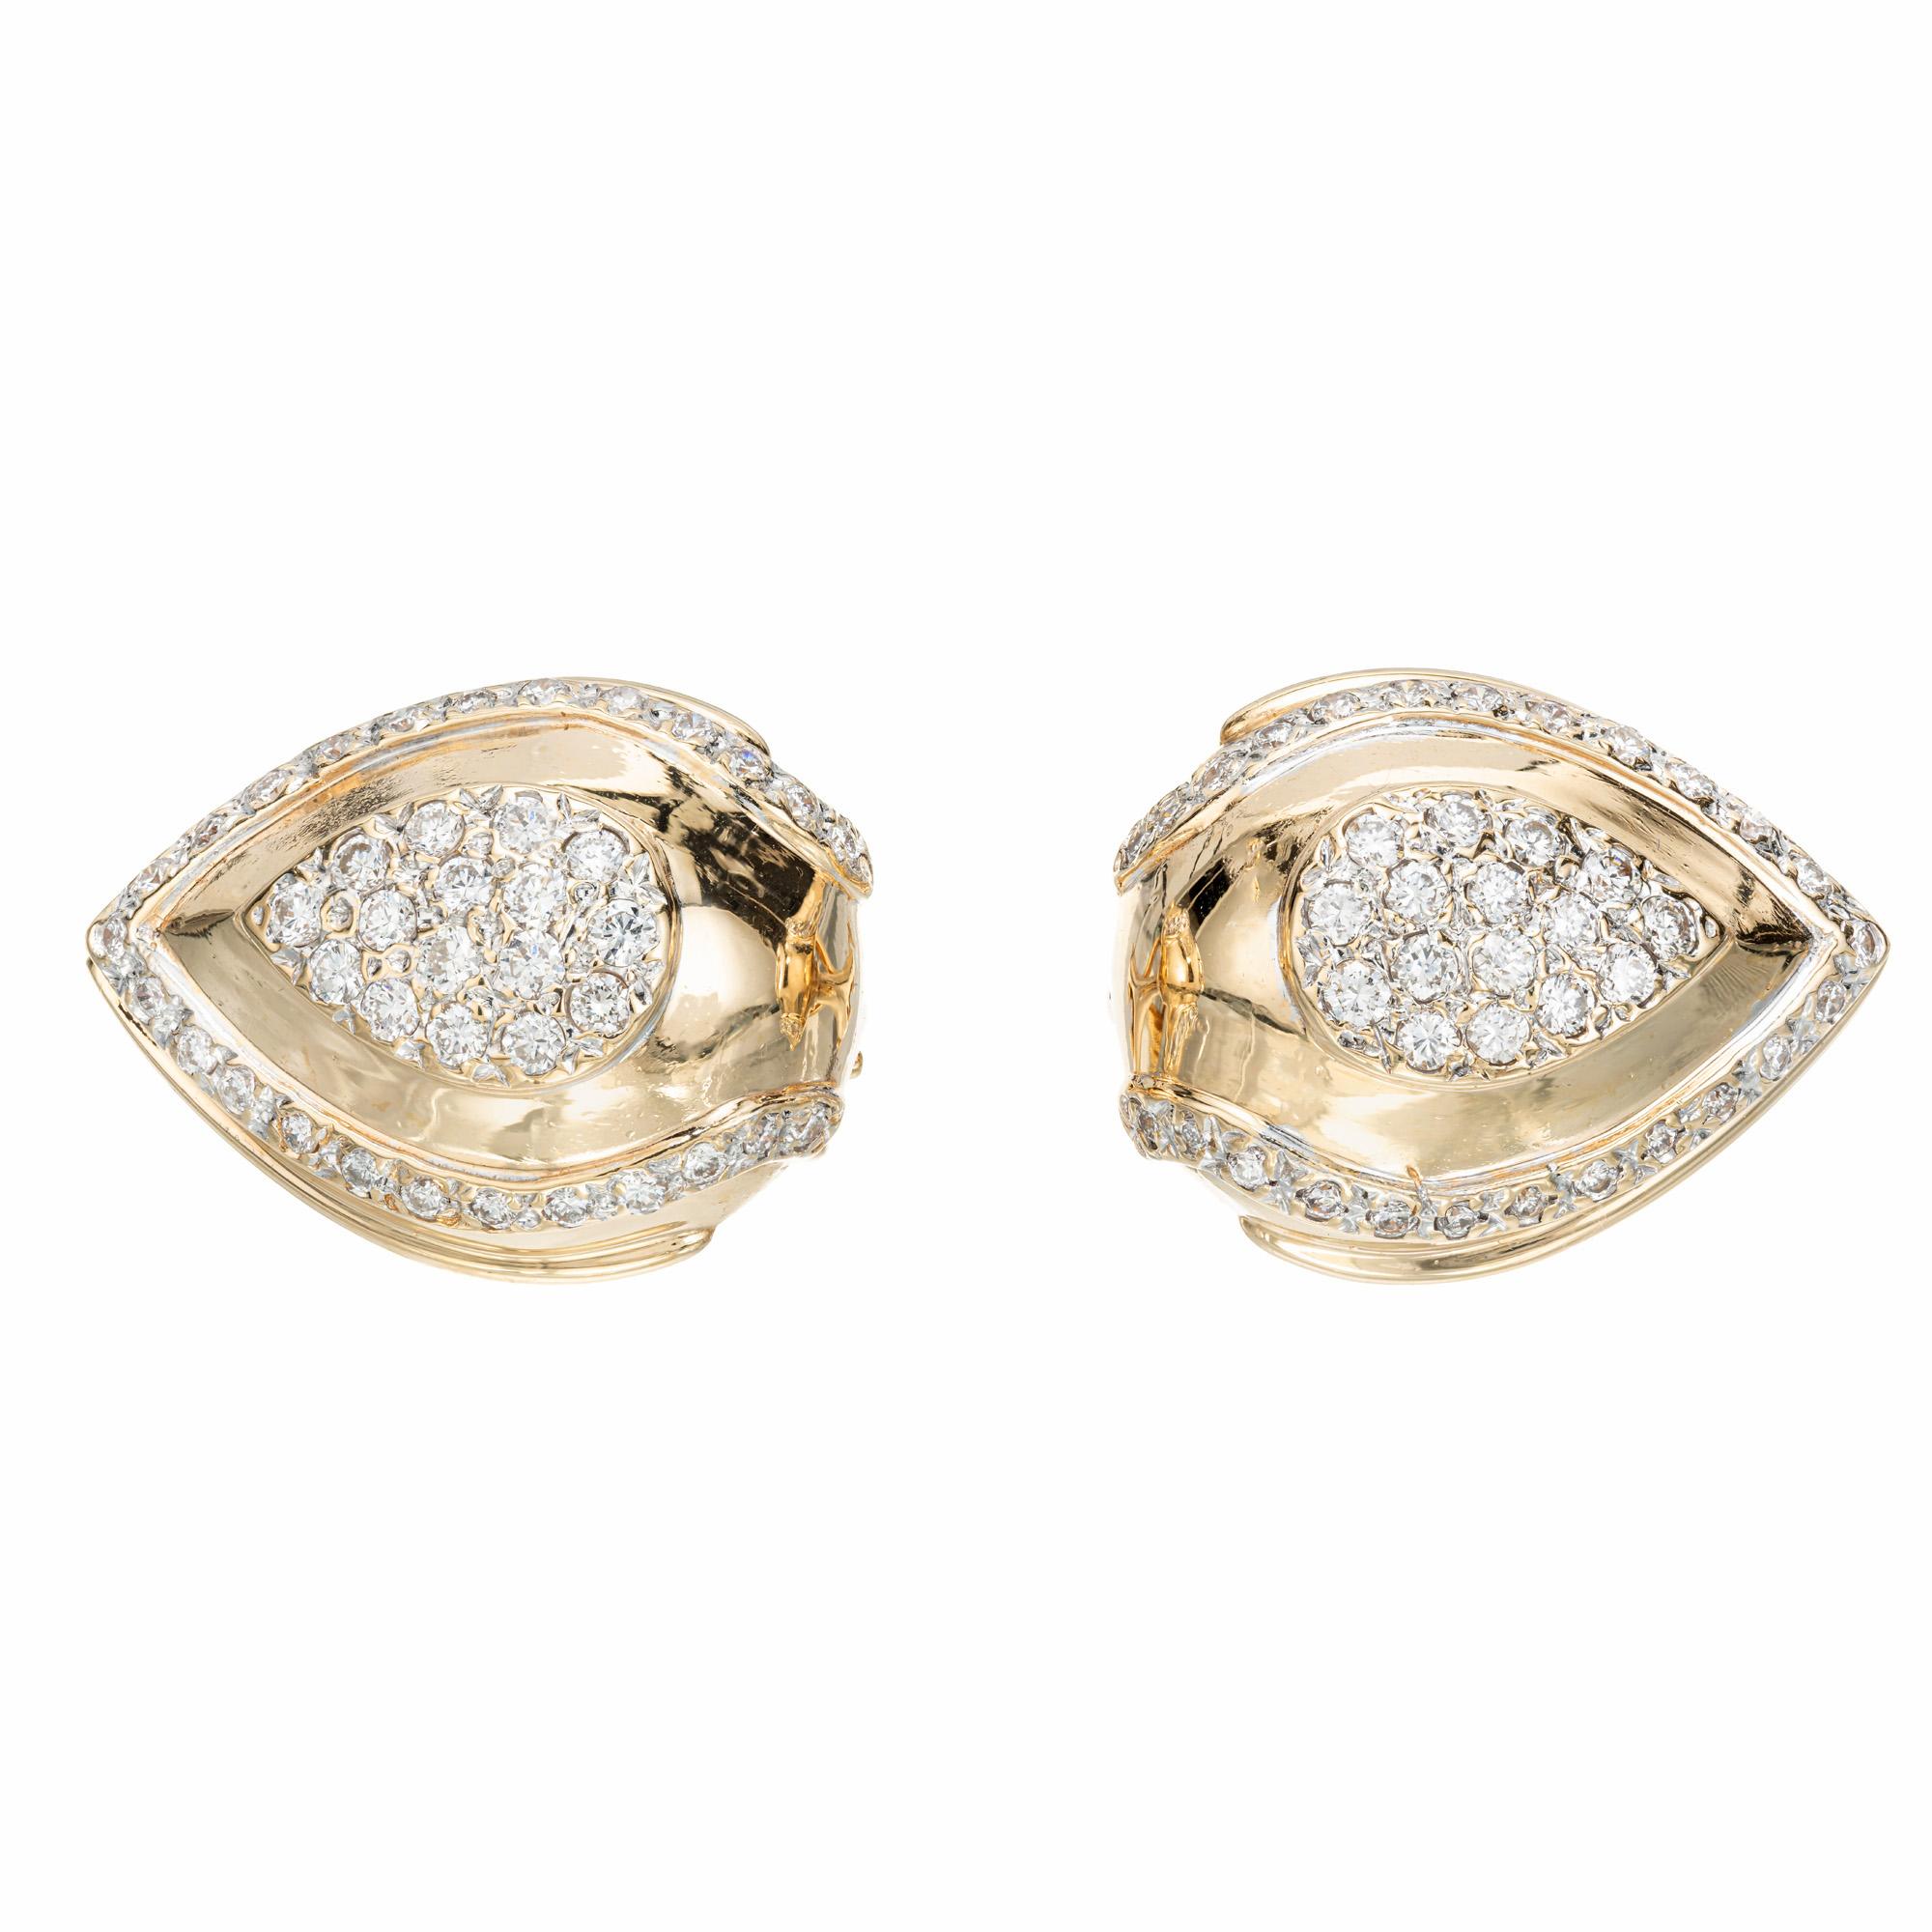 Clip post domed clip post diamond earrings. 82 round pave set diamonds set in pear shaped settings. .

82 round brilliant ct diamonds, G VS approx. .75cts
14k yellow gold 
Stamped: 14k
11.3 grams
Top to bottom: 21.3mm or .84 Inches
Width: 16.5mm or